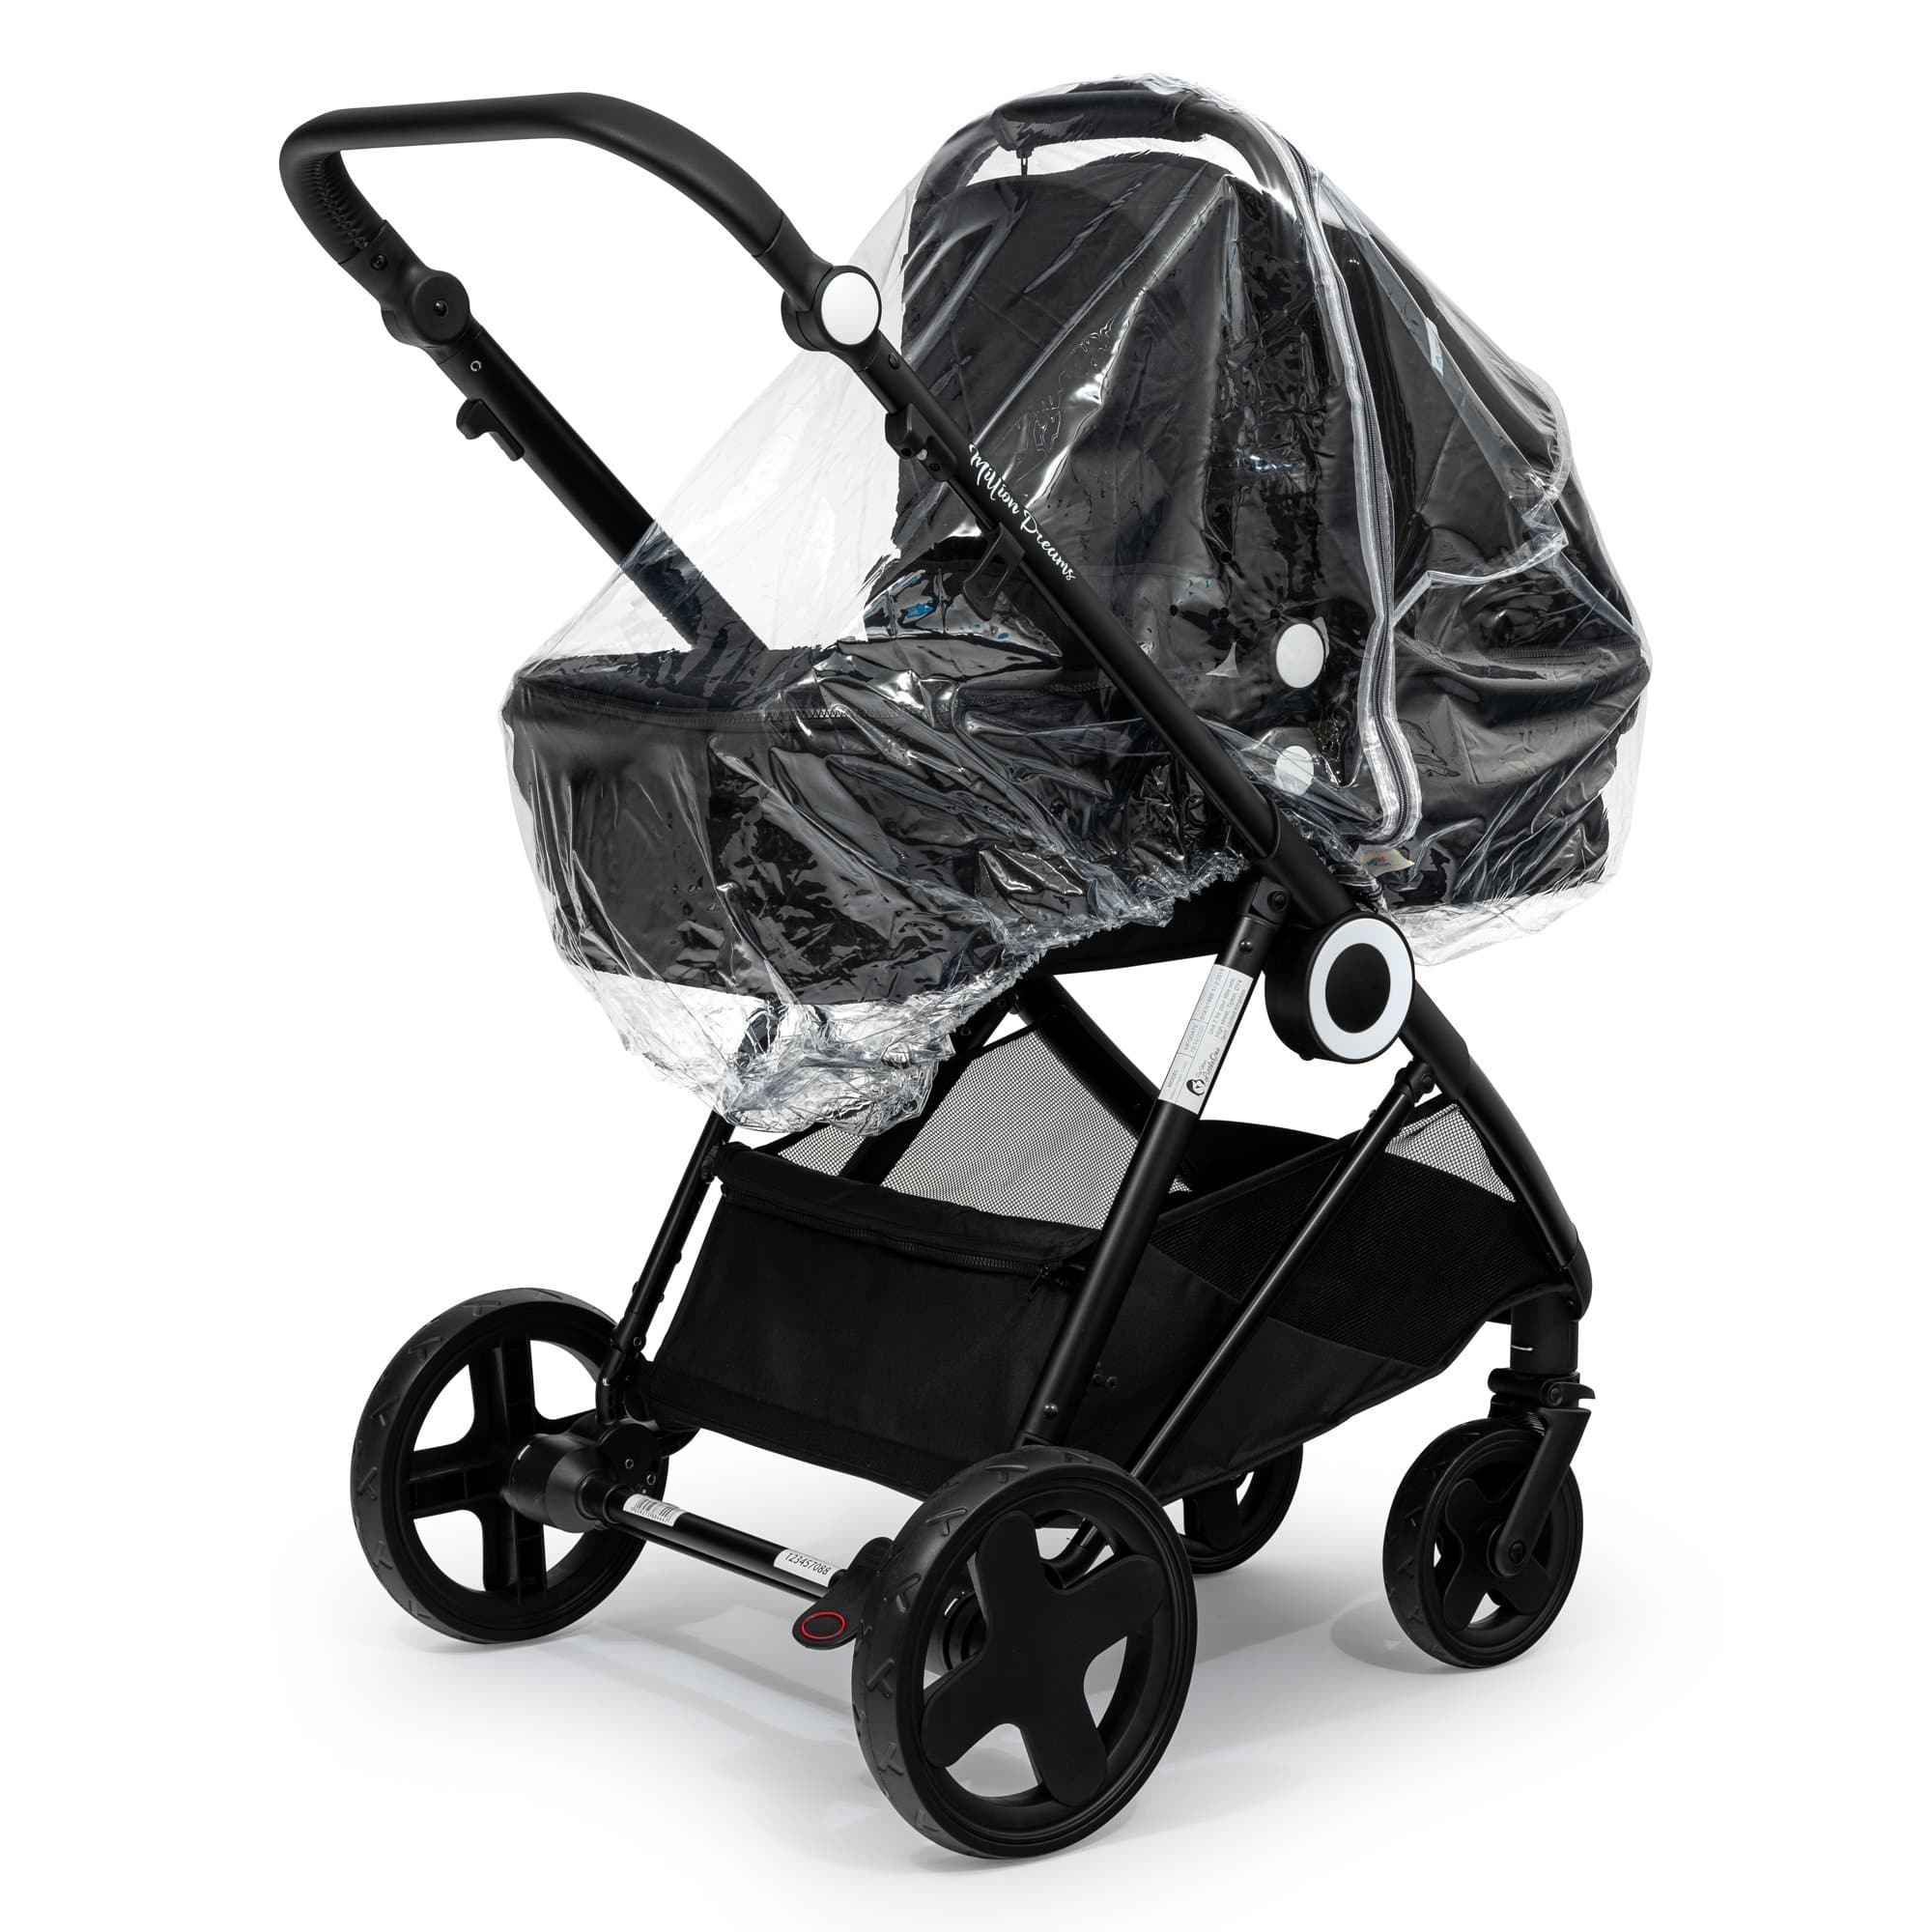 2 in 1 Rain Cover Compatible with Cosatto - Fits All Models - For Your Little One